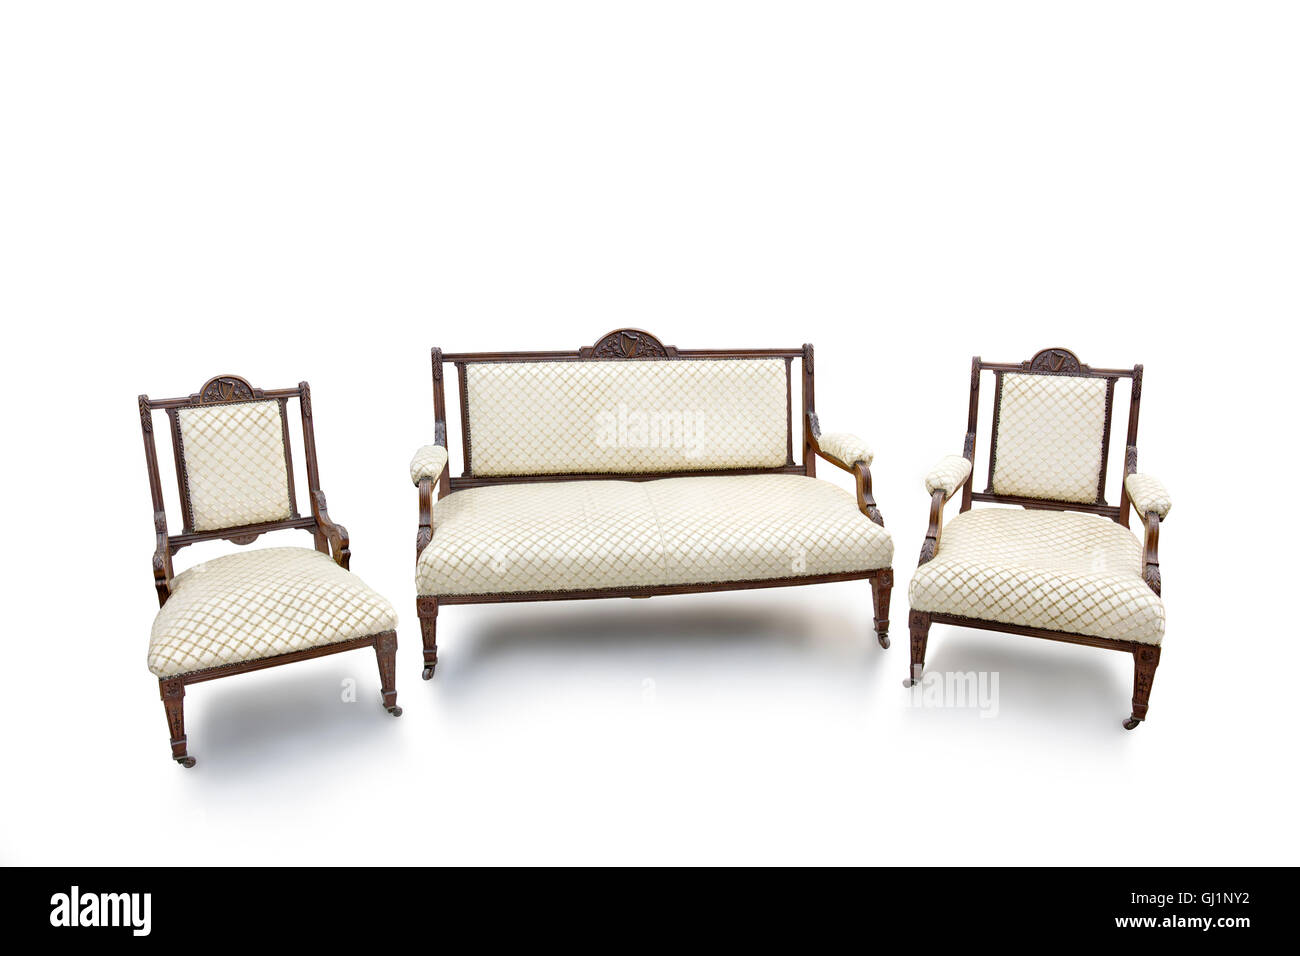 Antique wood armchairs and sofa. Stock Photo